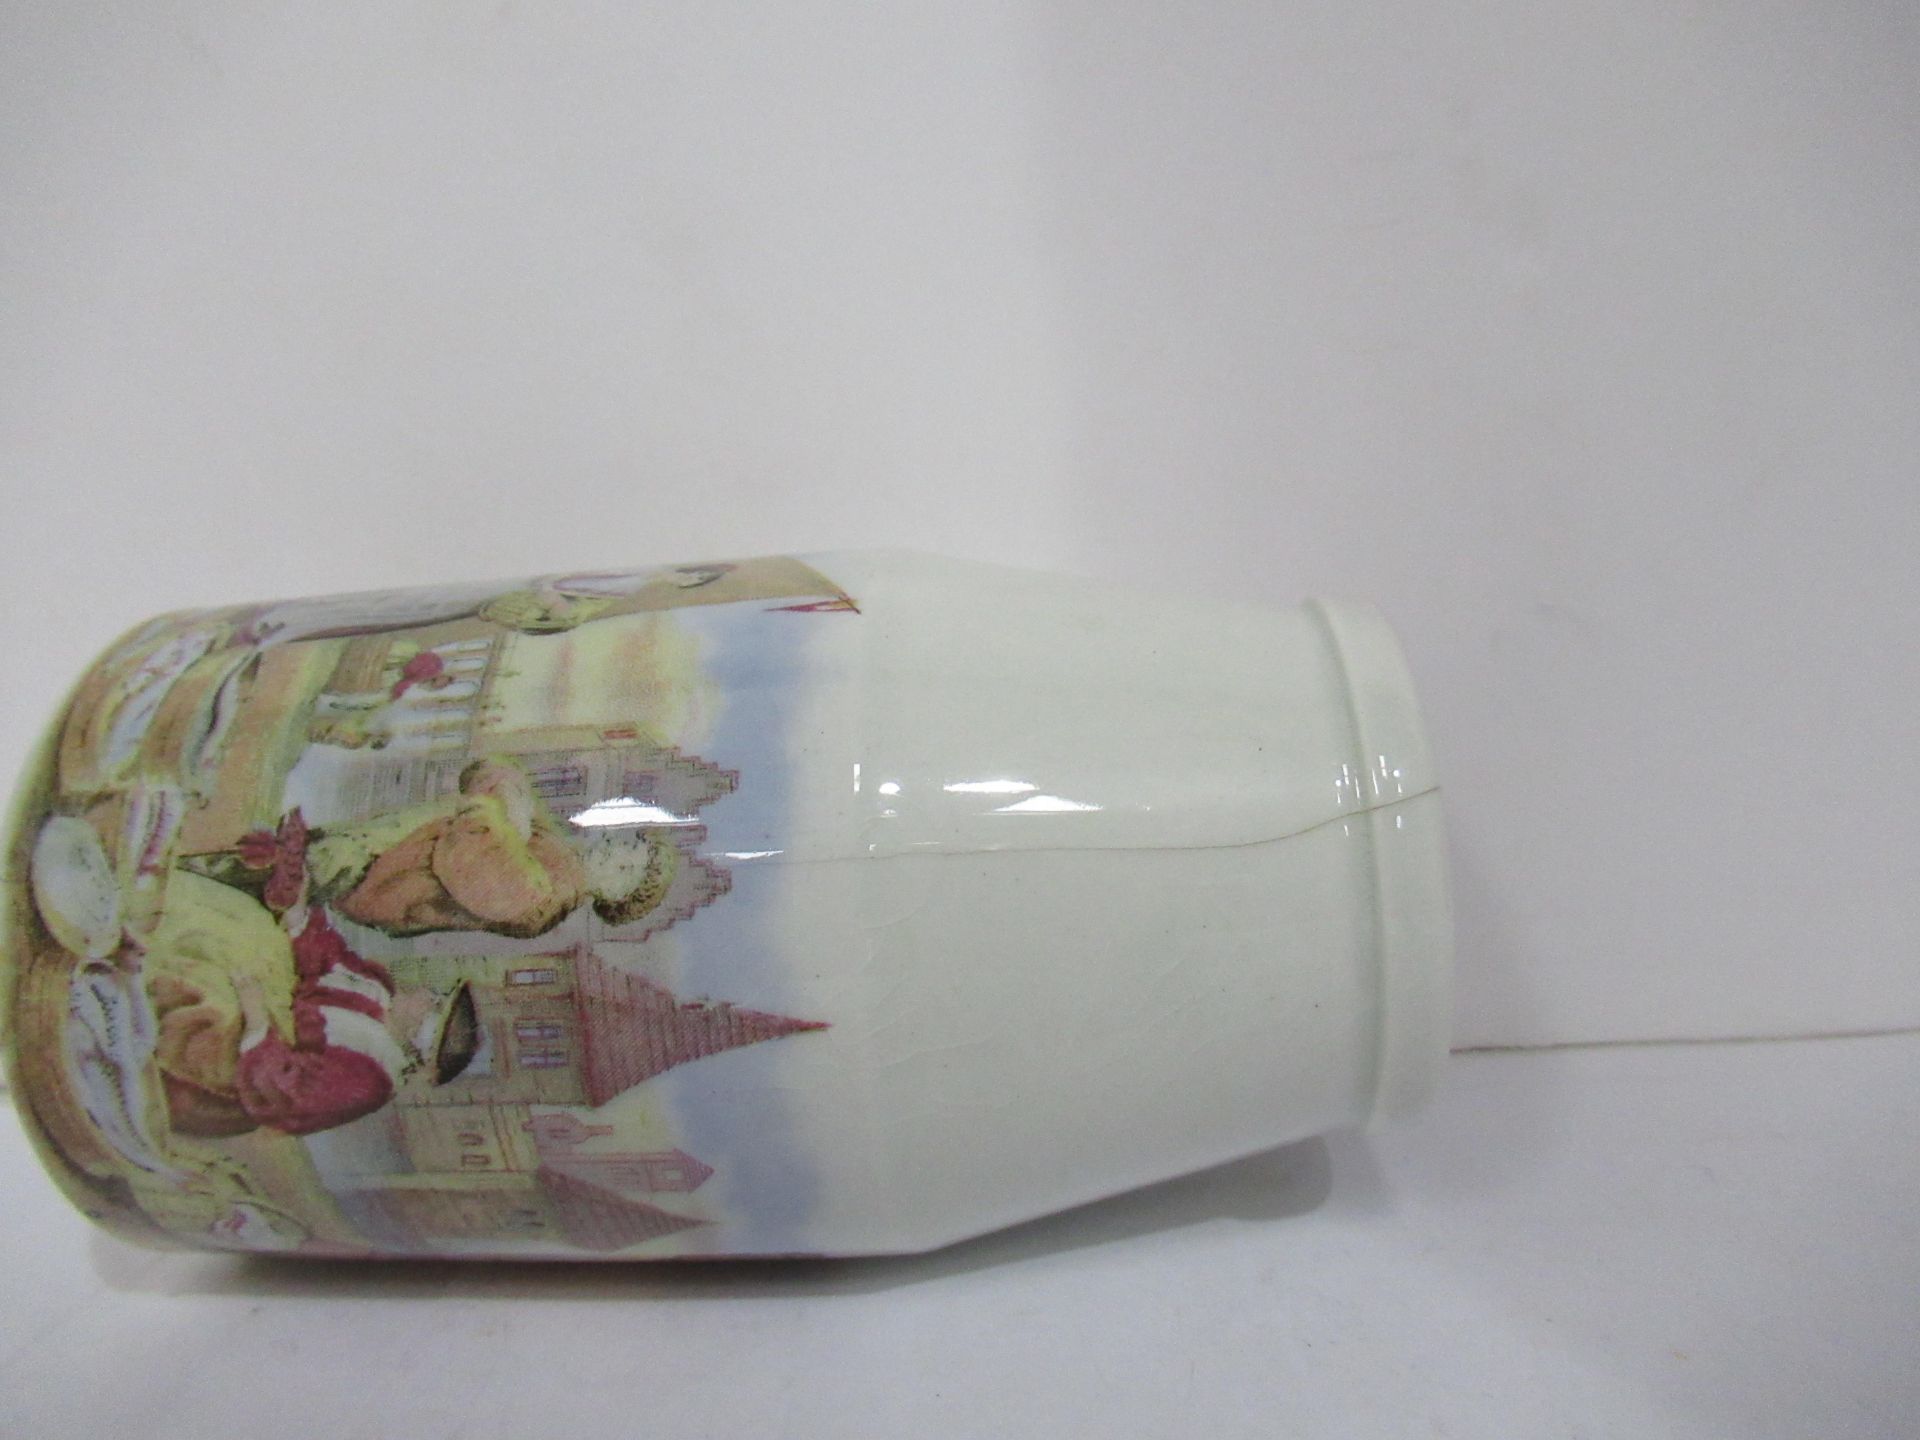 6x Prattware painted jars including one depicting Venice - Image 27 of 42